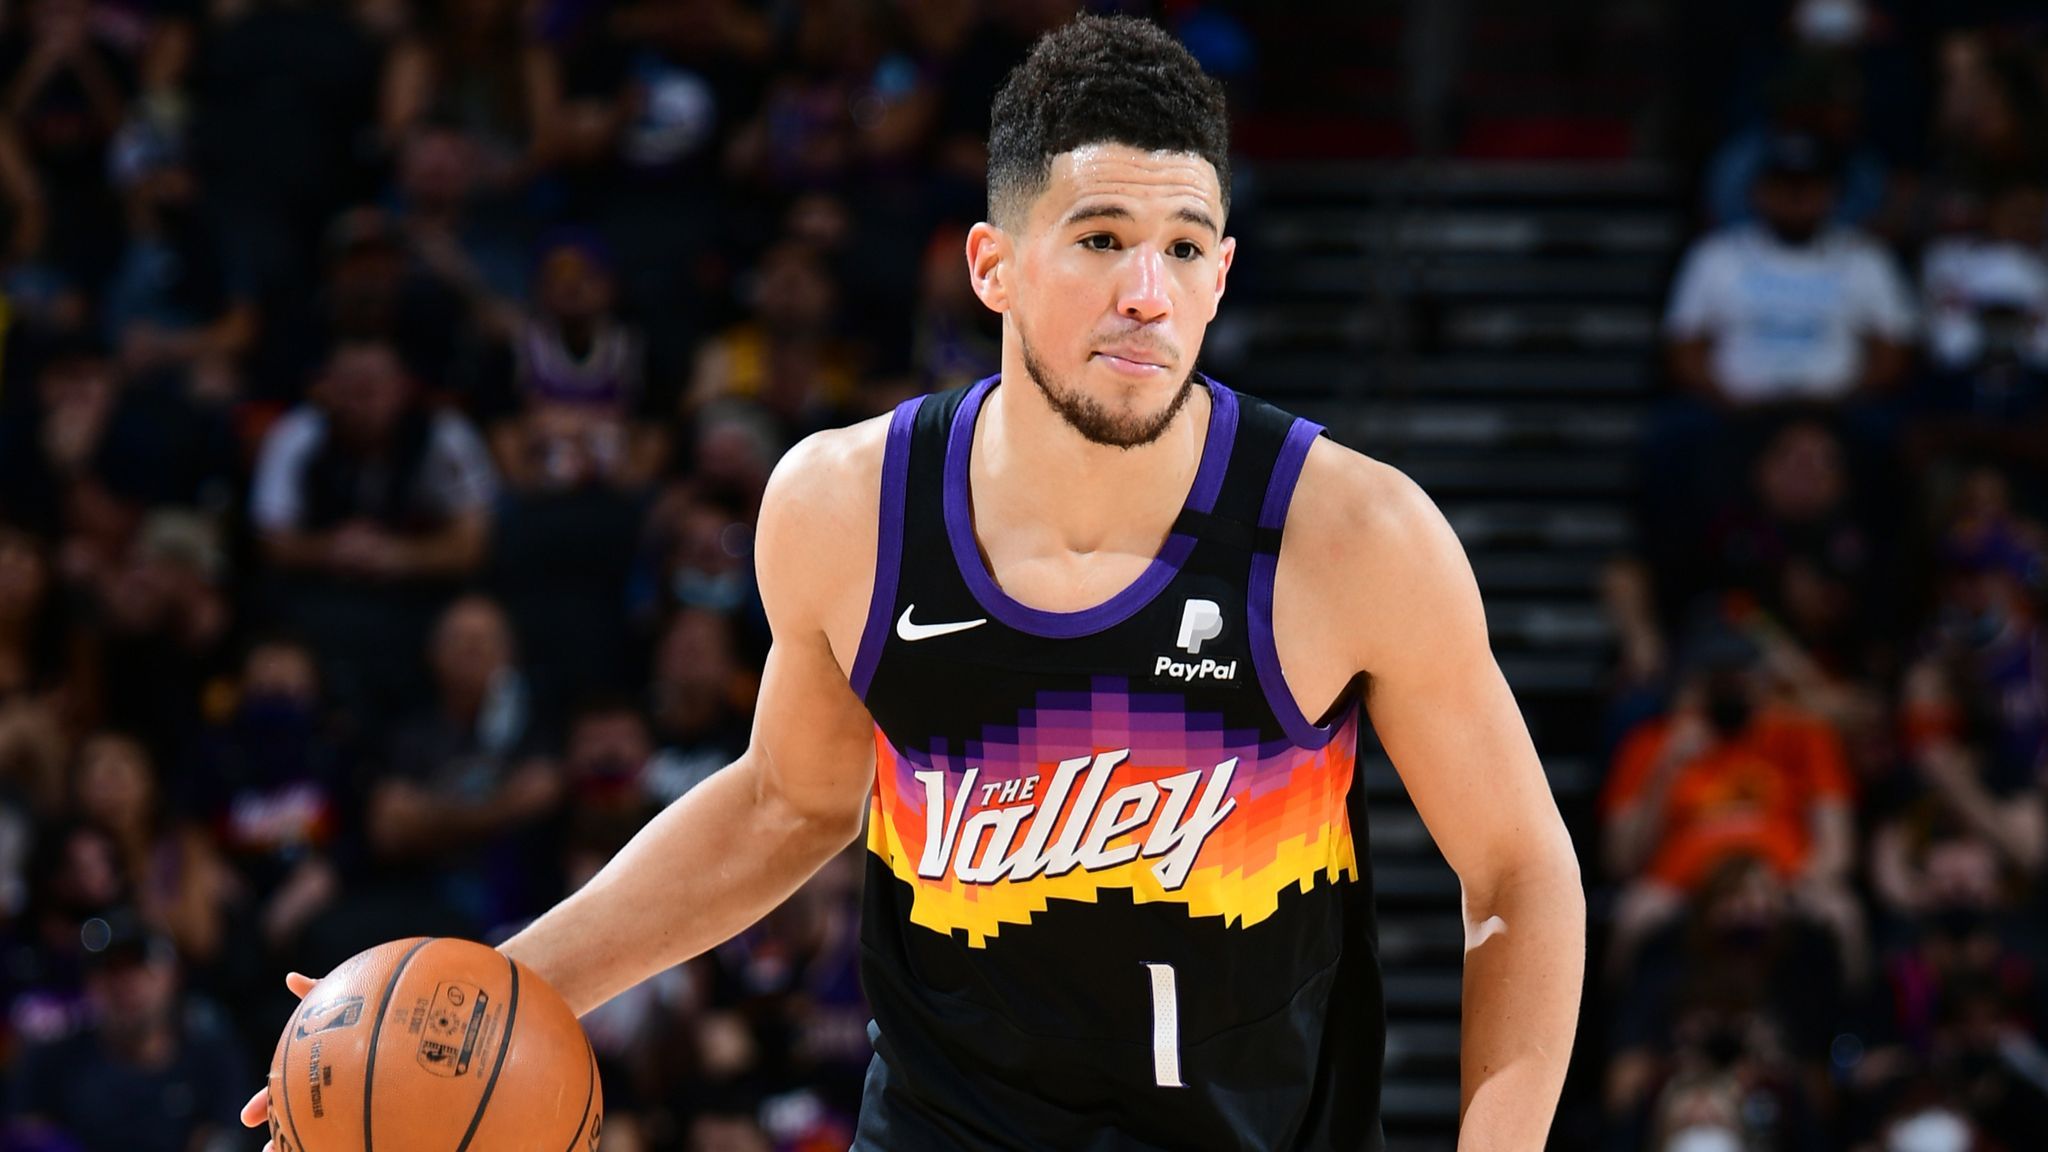 Devin Booker fuels the Phoenix Suns to Game 1 win over the Los Angeles Lakers with scintillating playoff debut